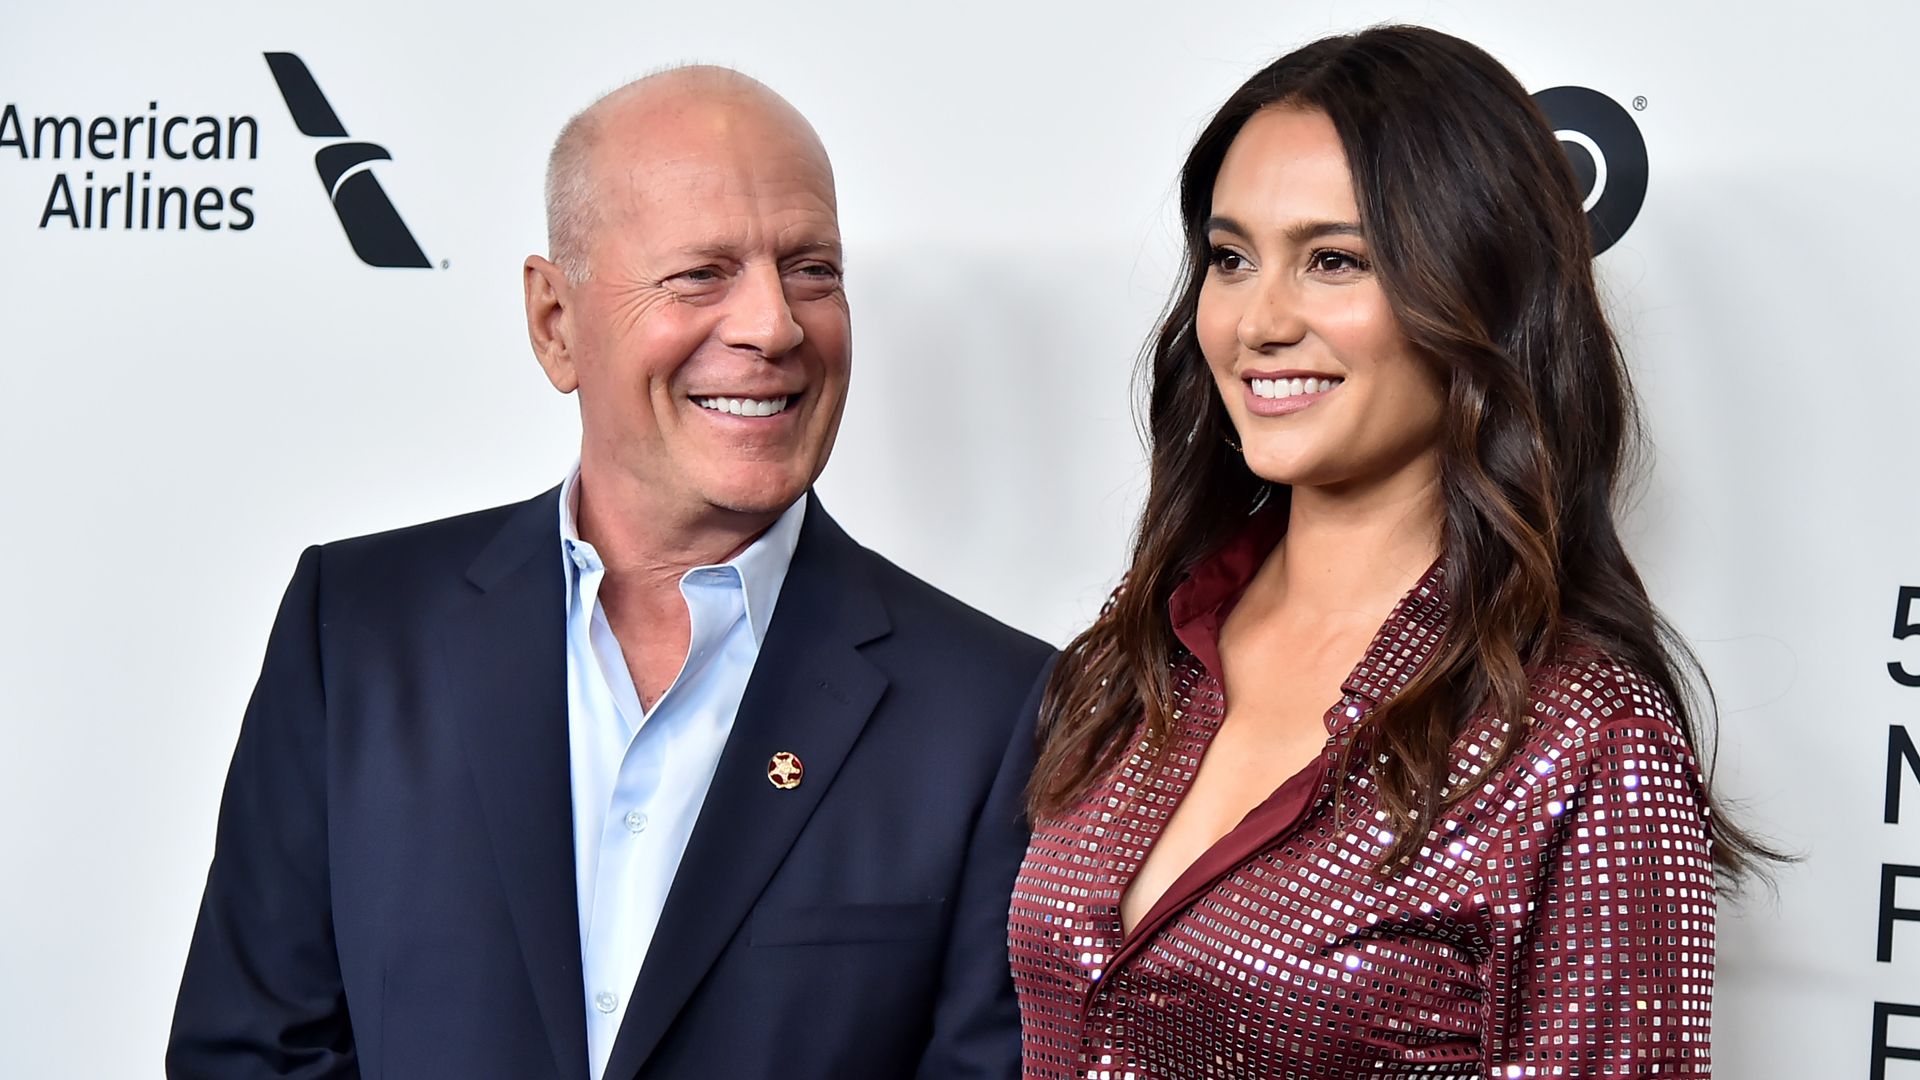  Bruce Willis and wife Emma Heming Willis attend the "Motherless Brooklyn" Arrivals during the 57th New York Film Festival on October 11, 2019 in New York City